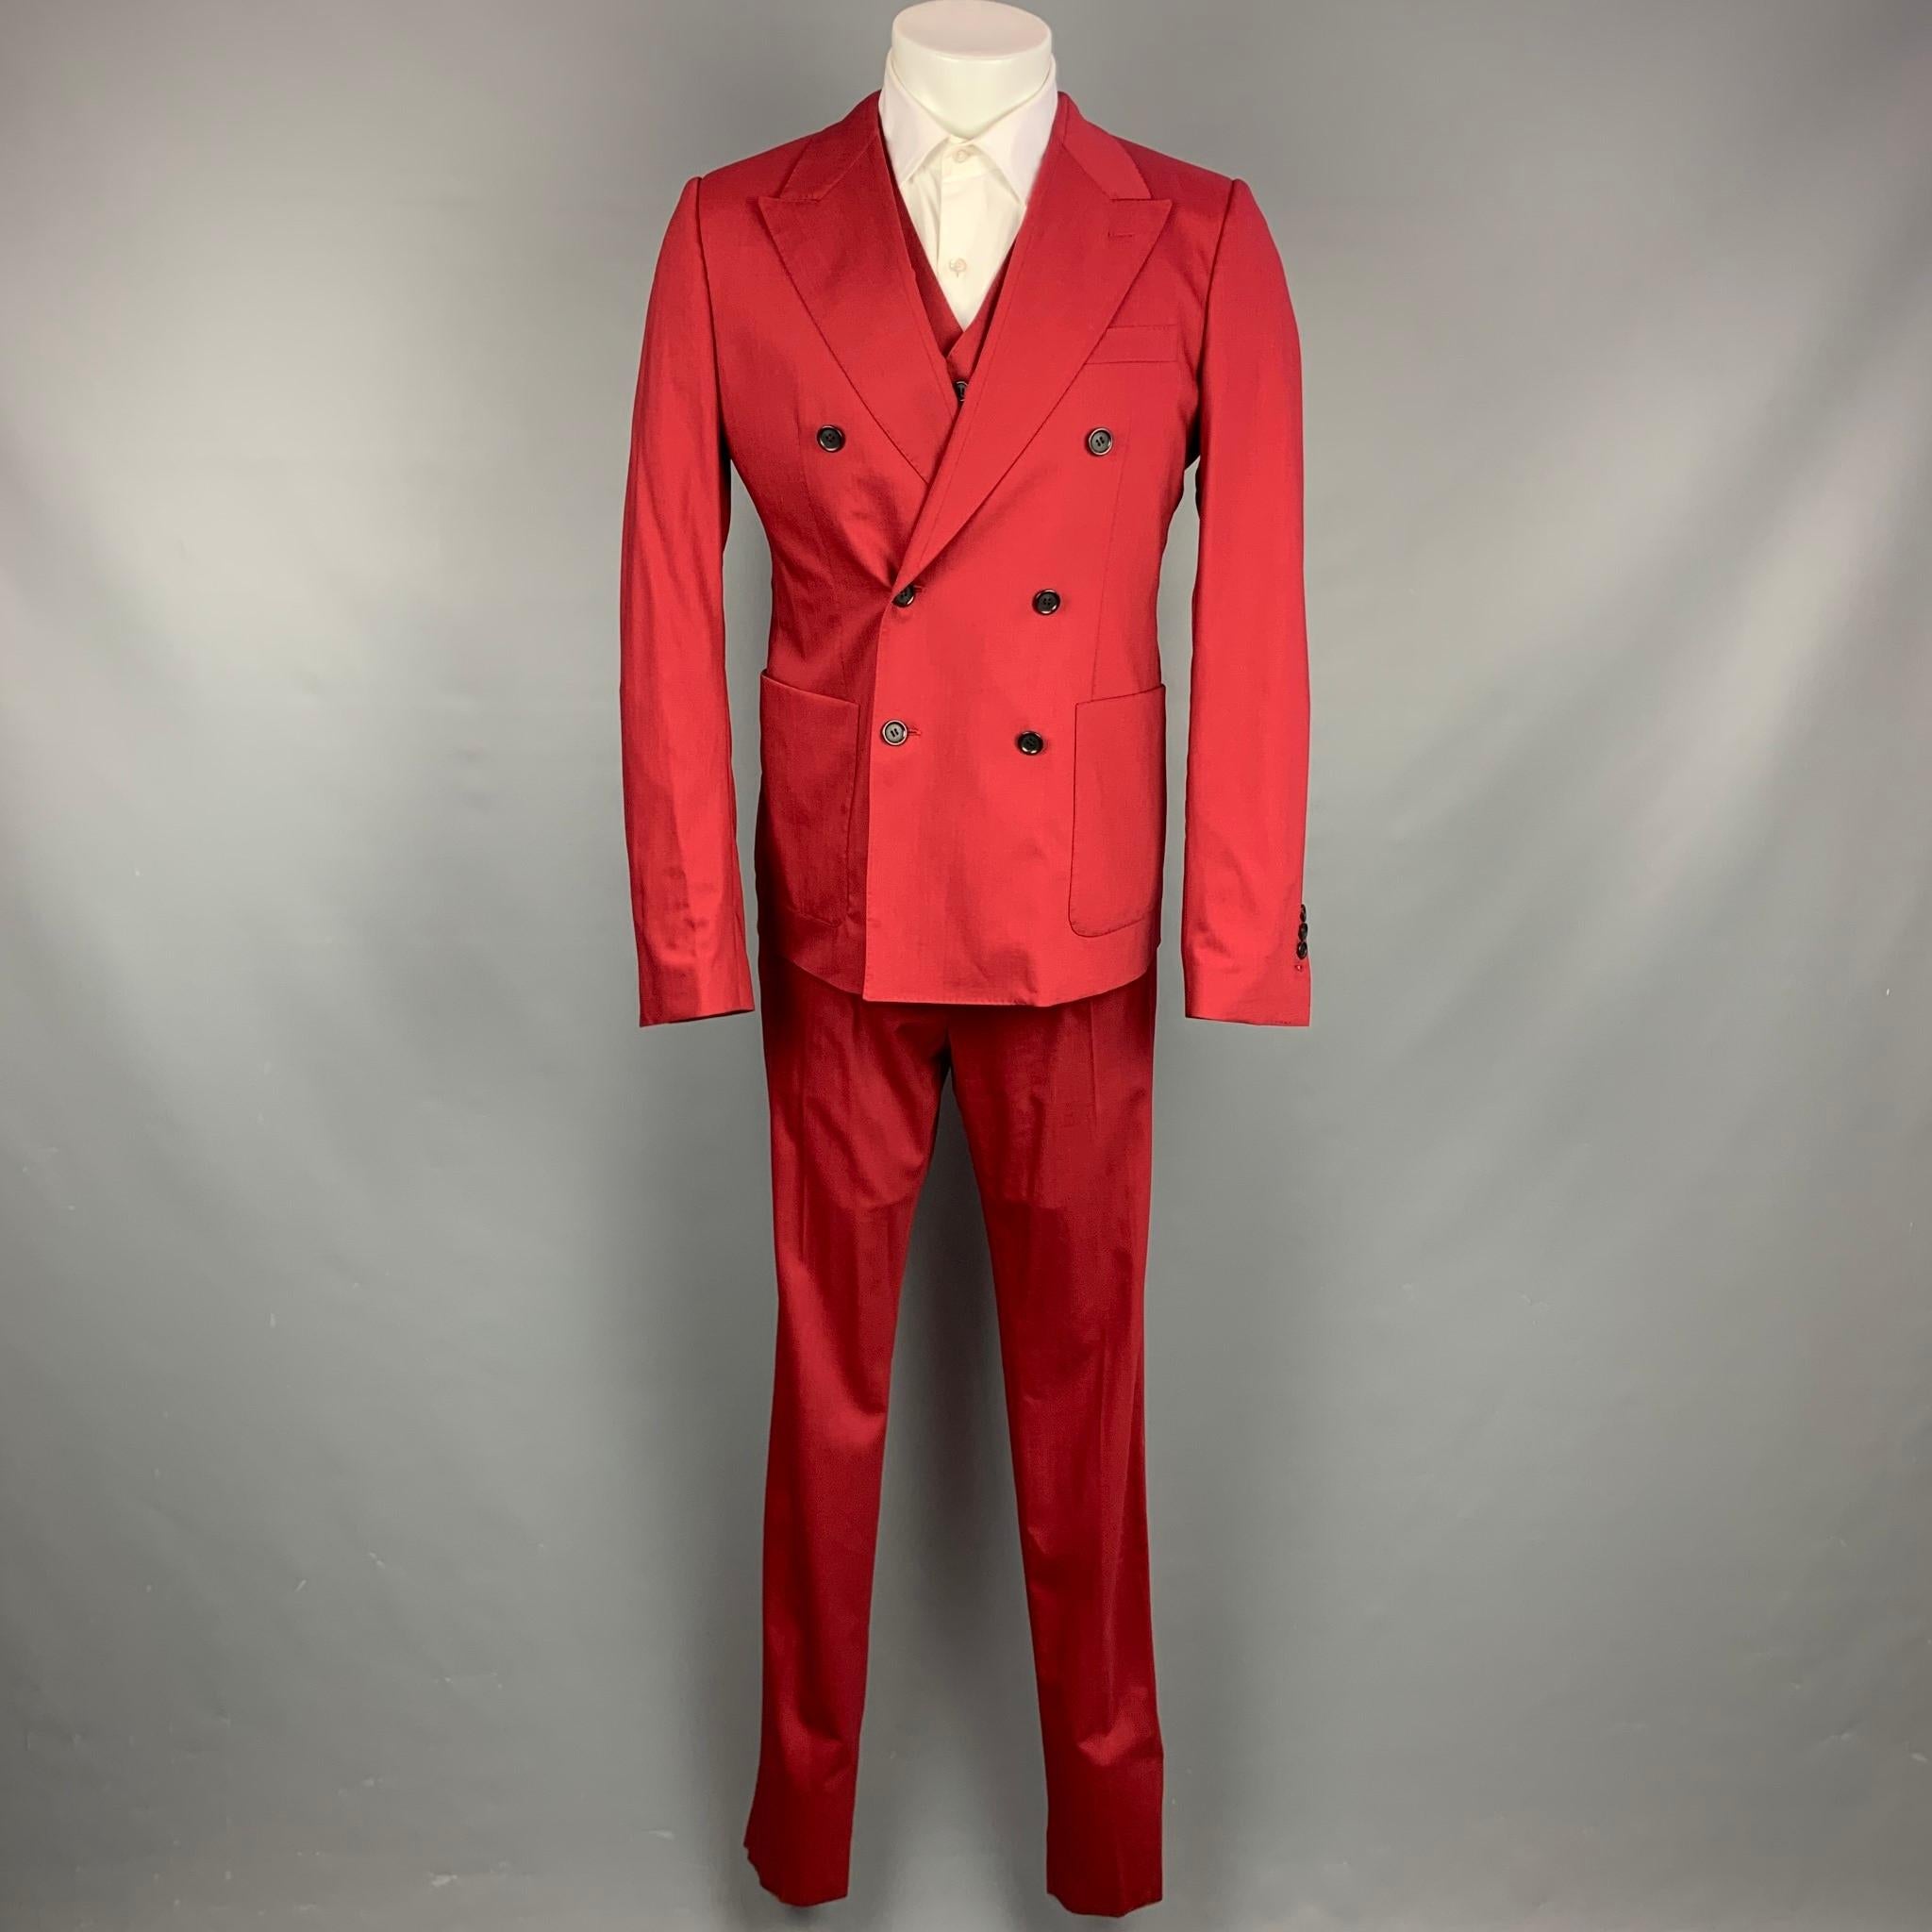 DOLCE & GABBANA suit comes in red wool / silk with a full liner and includes a double breasted sport coat with peak lapel and matching vest and flat front trousers. Made in Italy.

New With Tags.
Marked: Jacket: IT 50
Vest: IT 50
Pants: IT